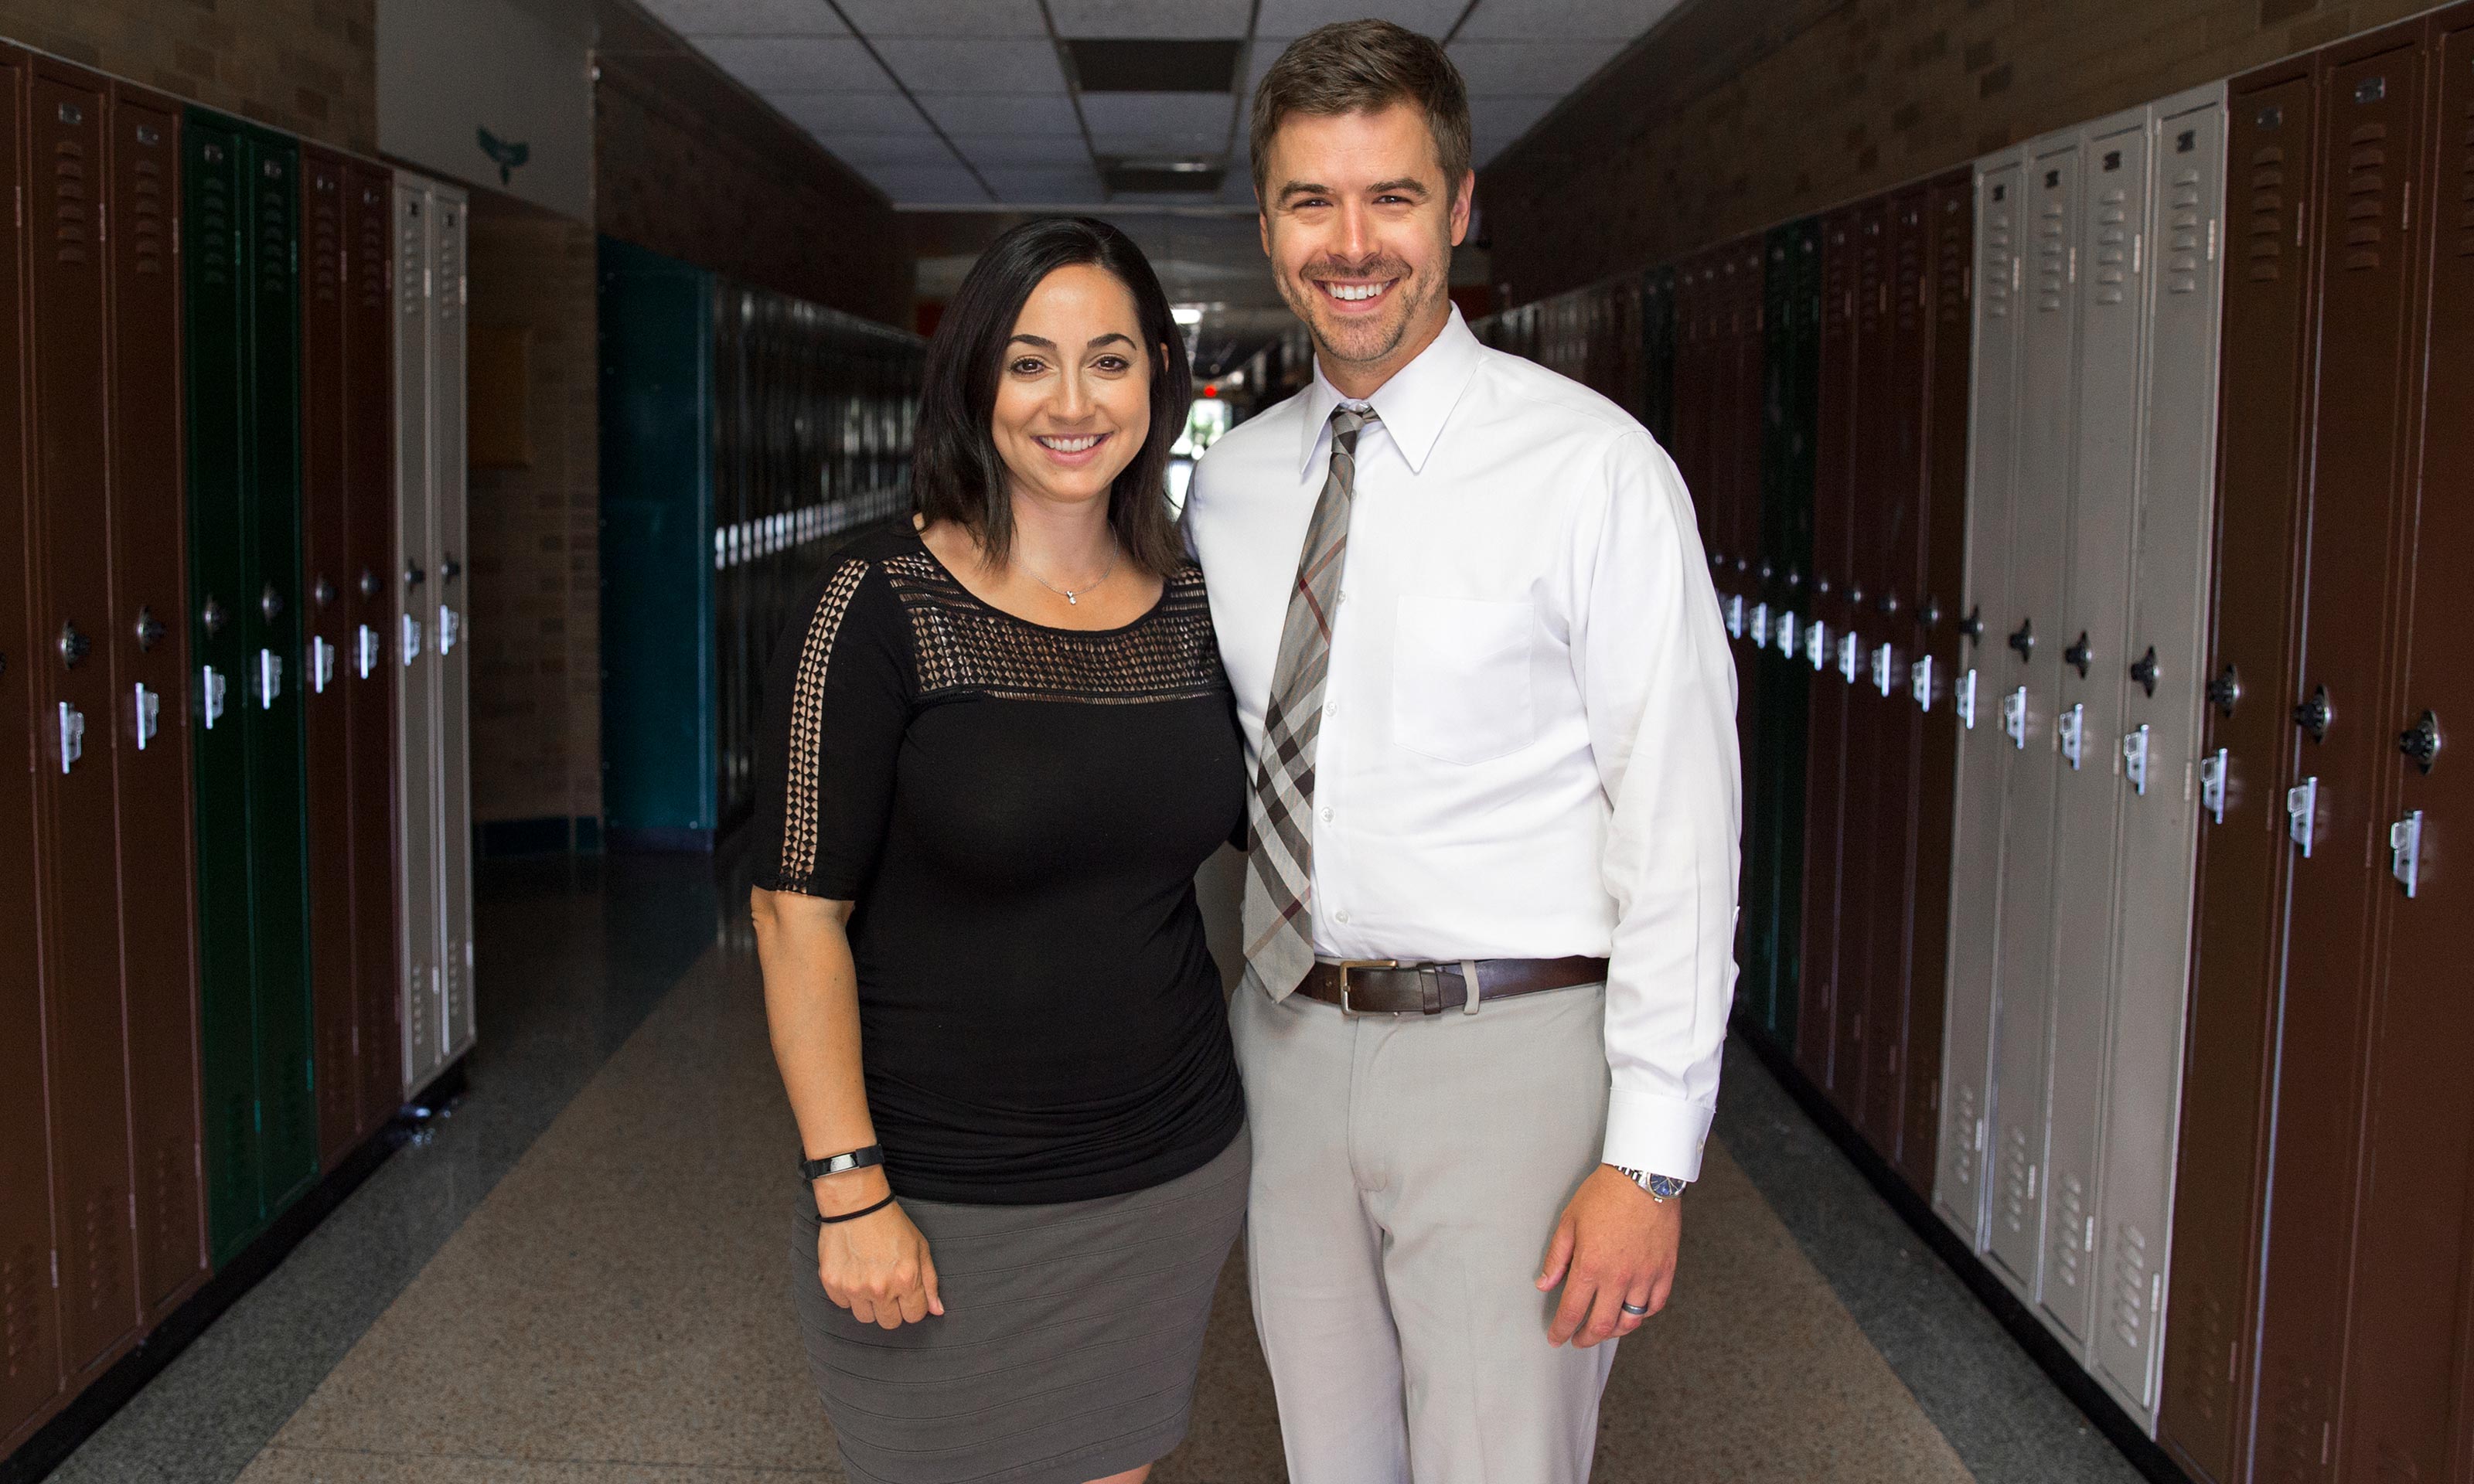 Oakland University alums Cliff and Angie Snitgen in the classroom